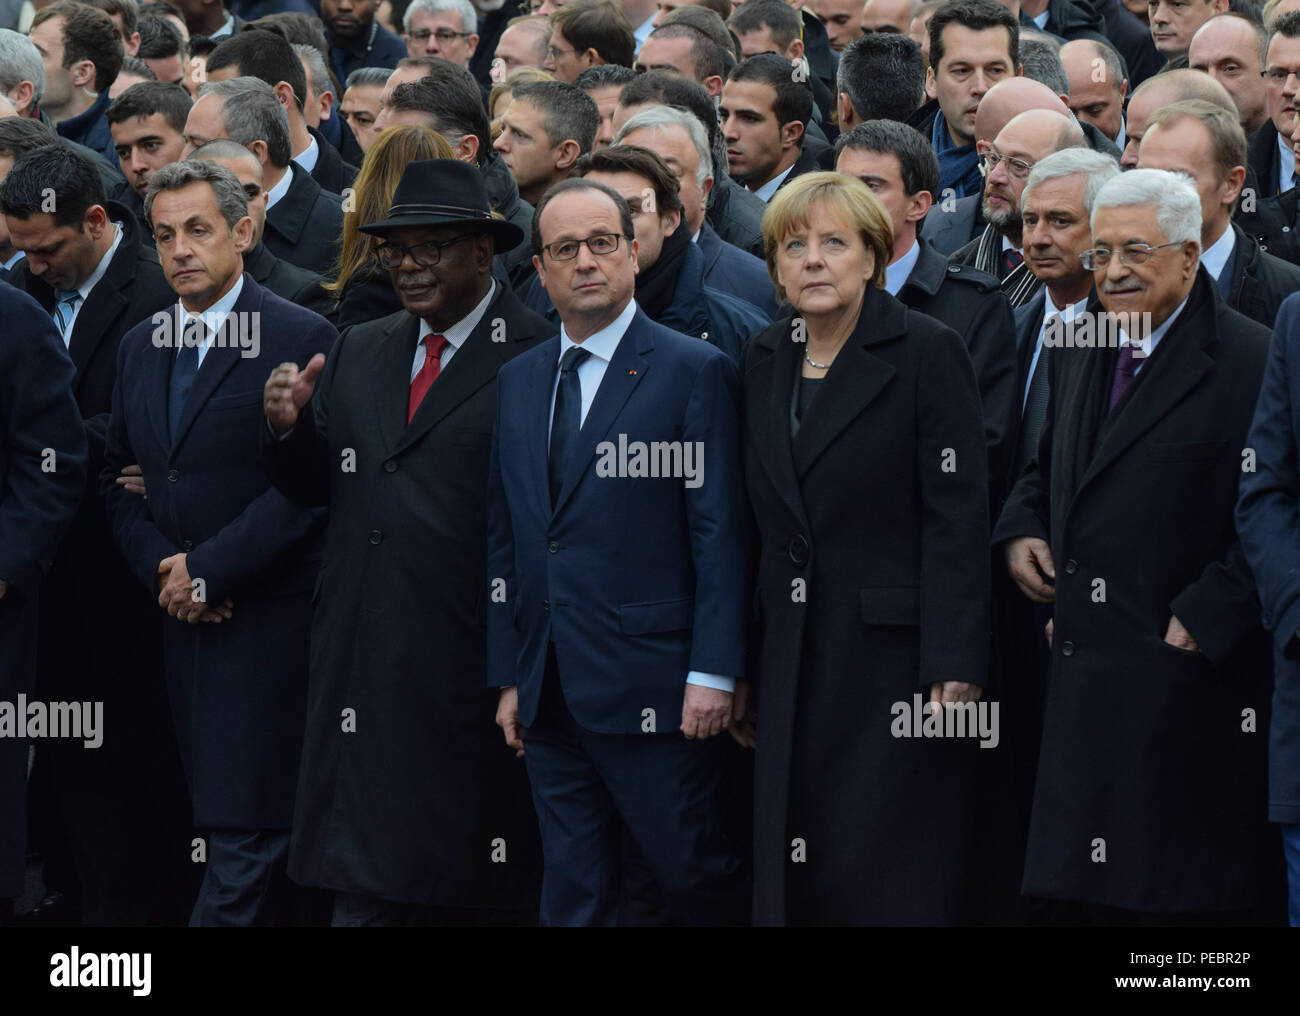 January 11, 2015 - Paris, France:  (L-R) Former French president Nicolas Sarkozy, Malian president Ibrahim Boubacar Keita, French President Francois Hollande, German chancellor Angela Merkel, Palestinian president Mahmoud Abbas take part in a march to support Freedom of expression and protest against terrorism in the French capital after three days of terror left 17 people dead. Four million people demonstrated across the country in a 'Marche Republicaine' (Republican March) celebrating the nation's unity in face of terrorist threats. La grande marche republicaine en hommage aux victimes de l' Stock Photo